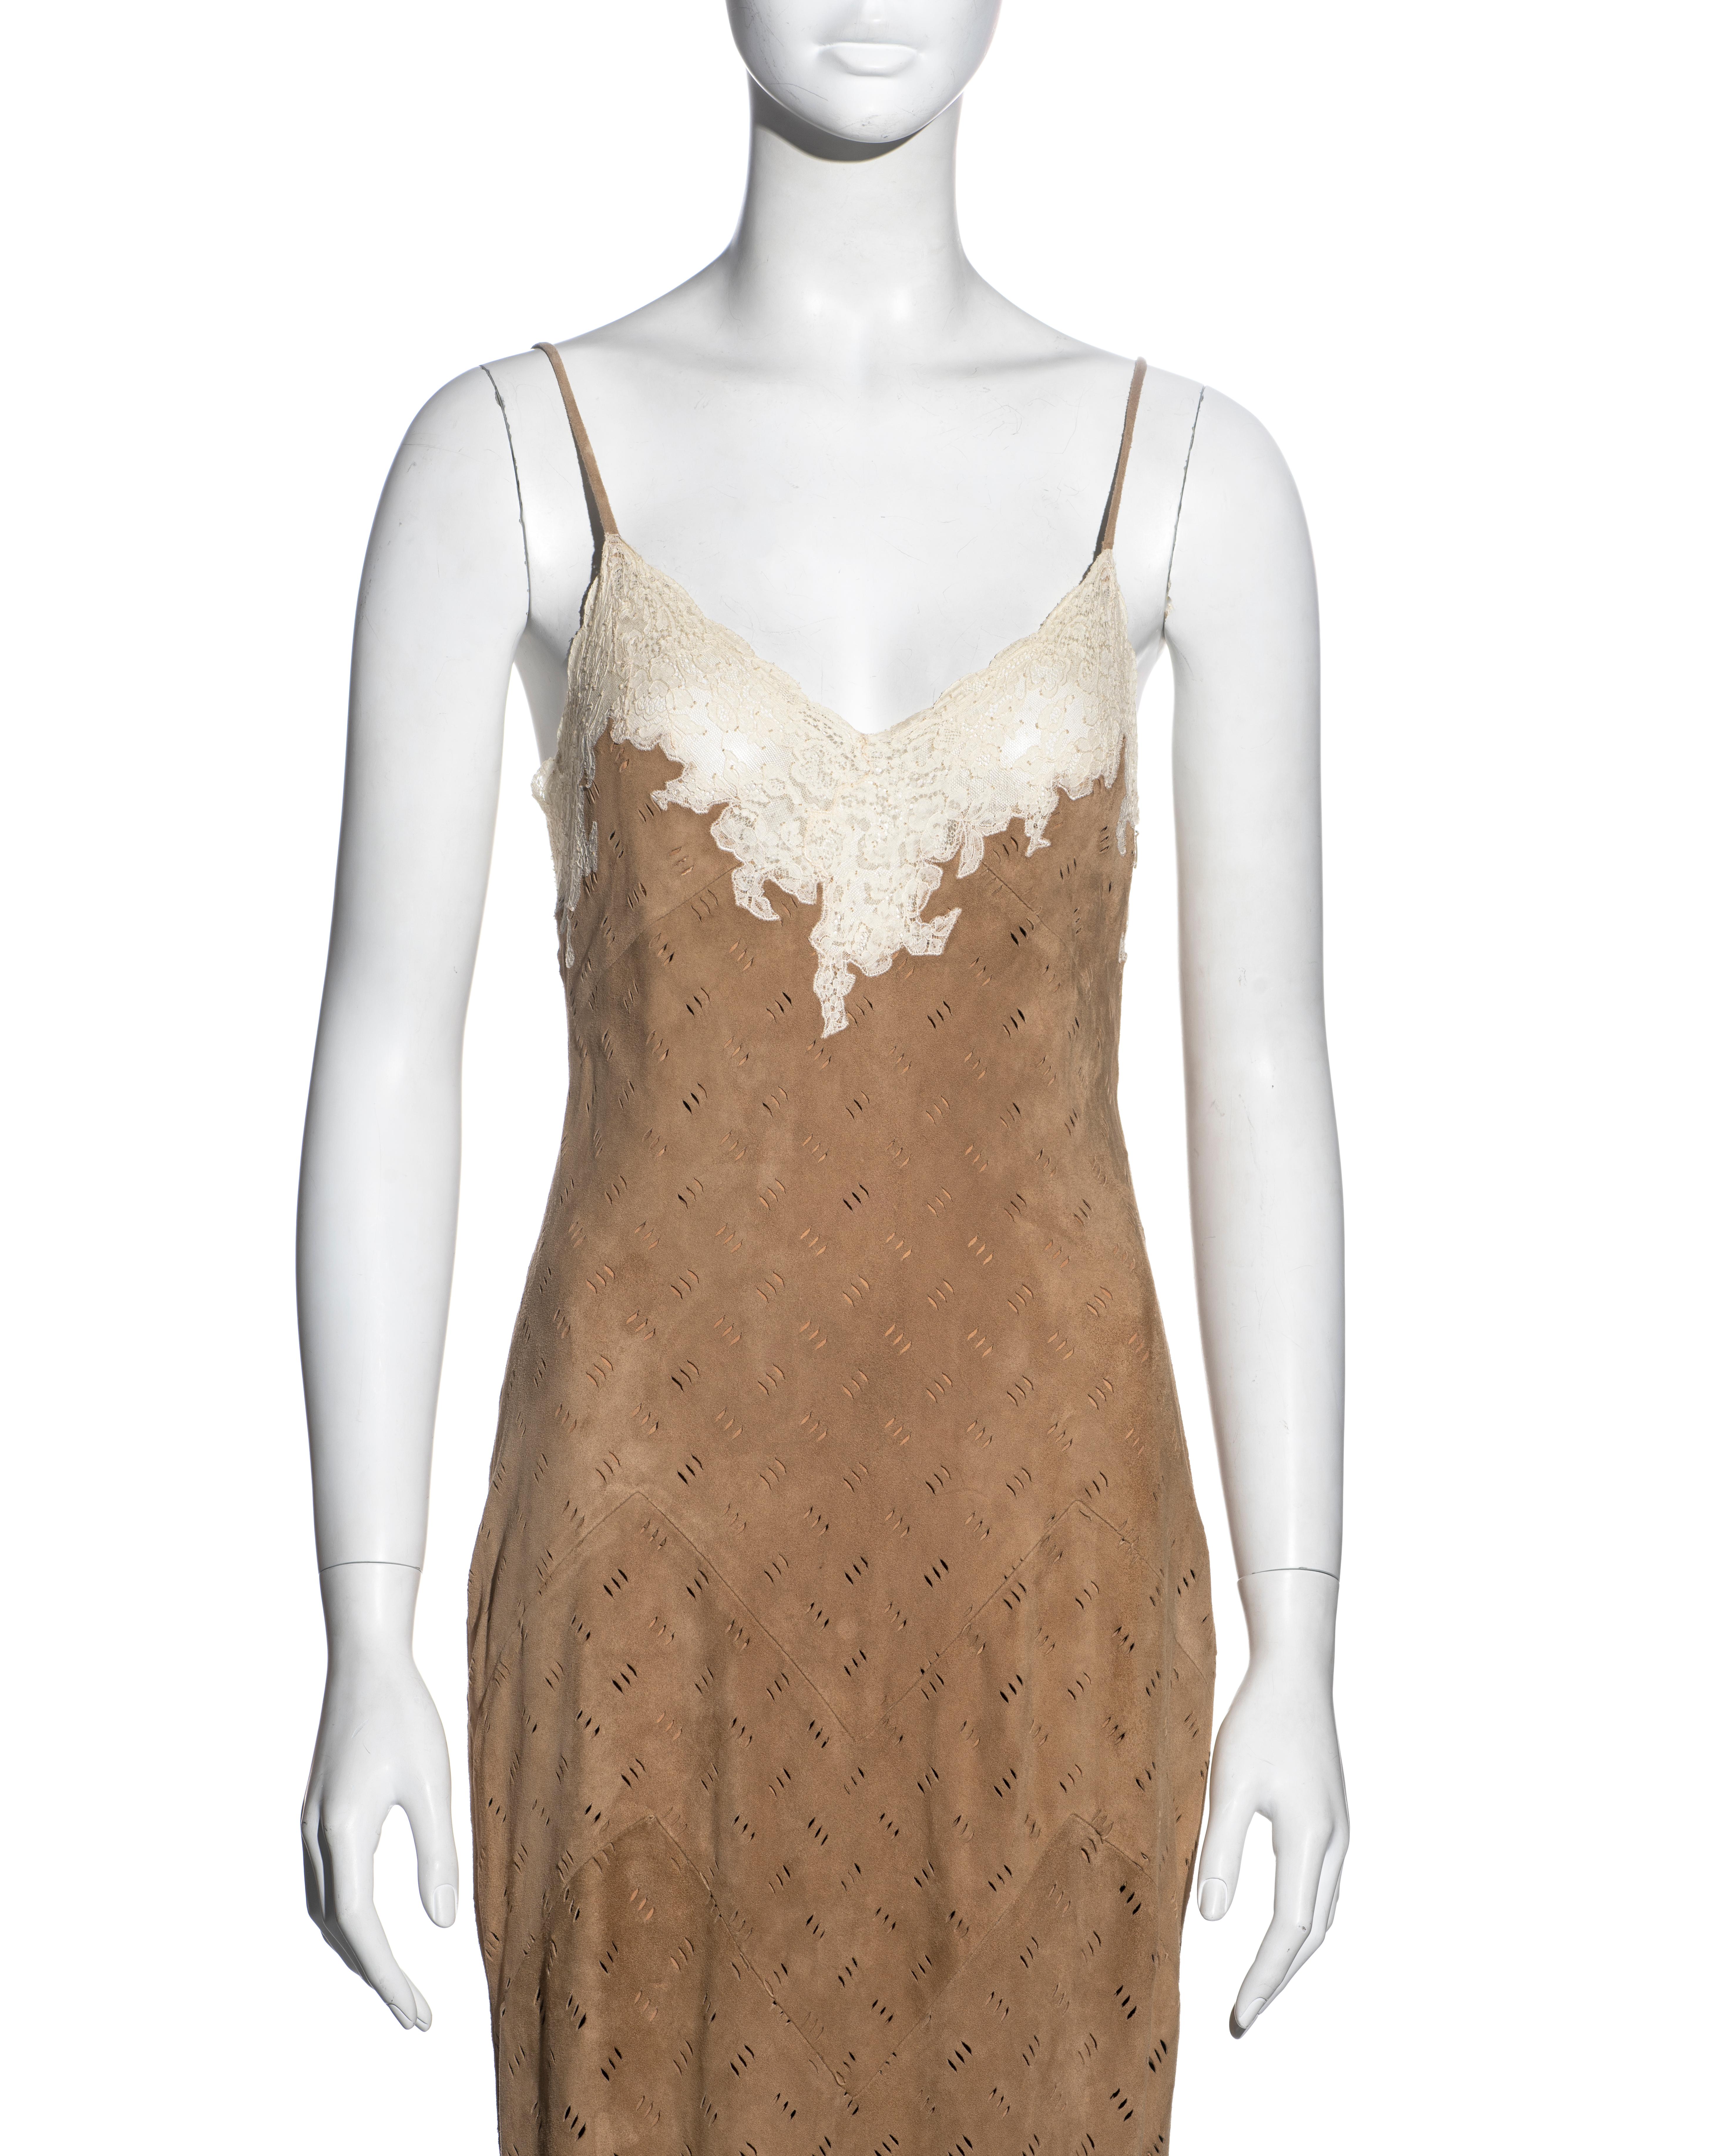 Women's Christian Dior by John Galliano Brown and Cream Suede and Lace Dress, FW 1999 For Sale